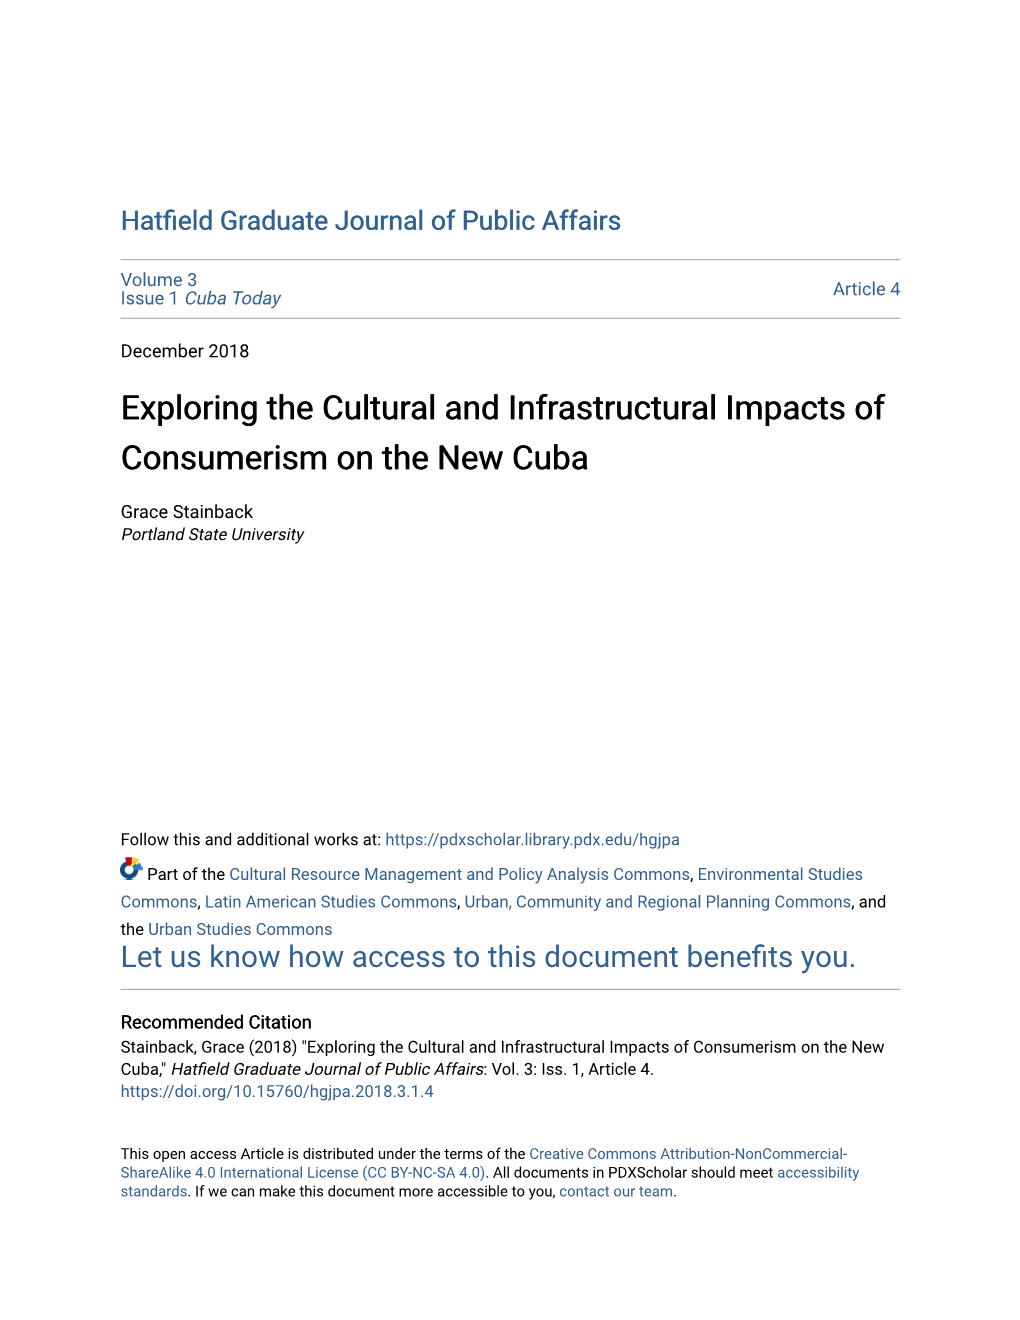 Exploring the Cultural and Infrastructural Impacts of Consumerism on the New Cuba